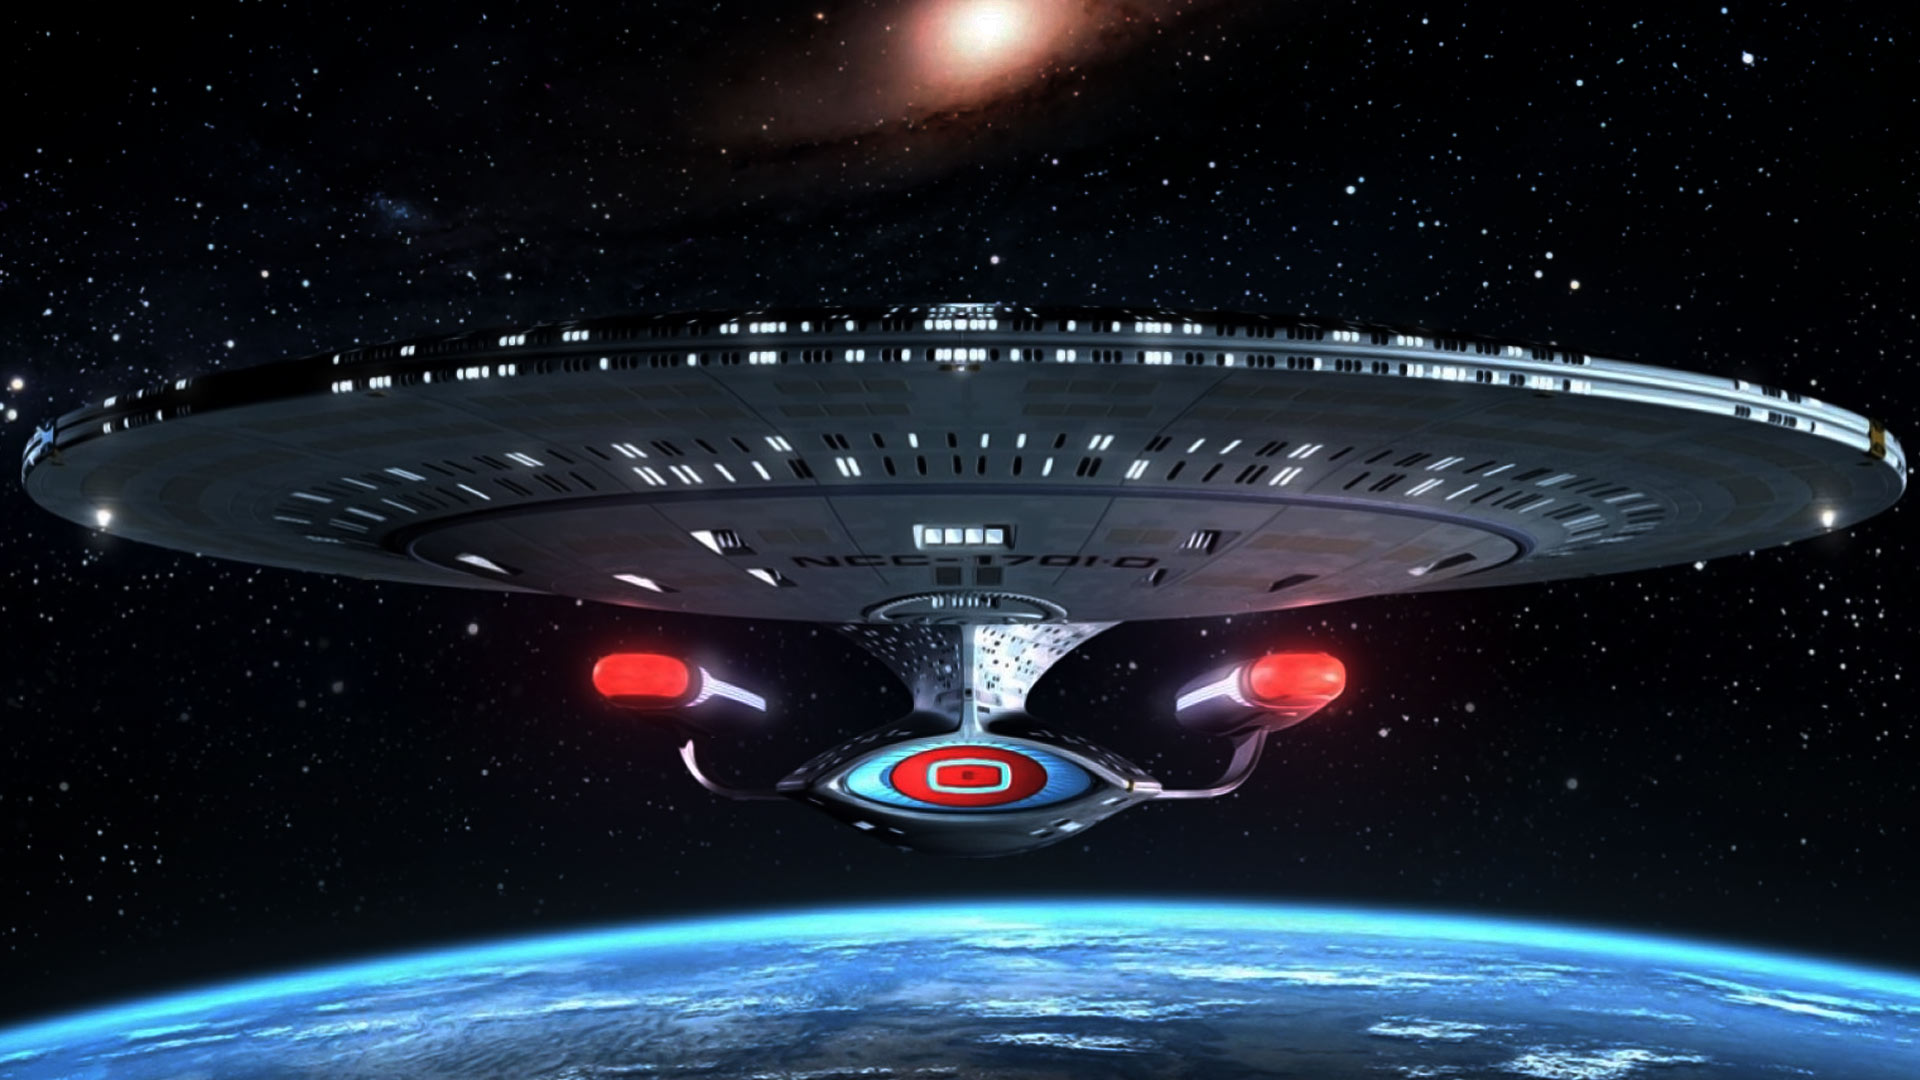 star trek wallpaper,outer space,spacecraft,space station,space,universe